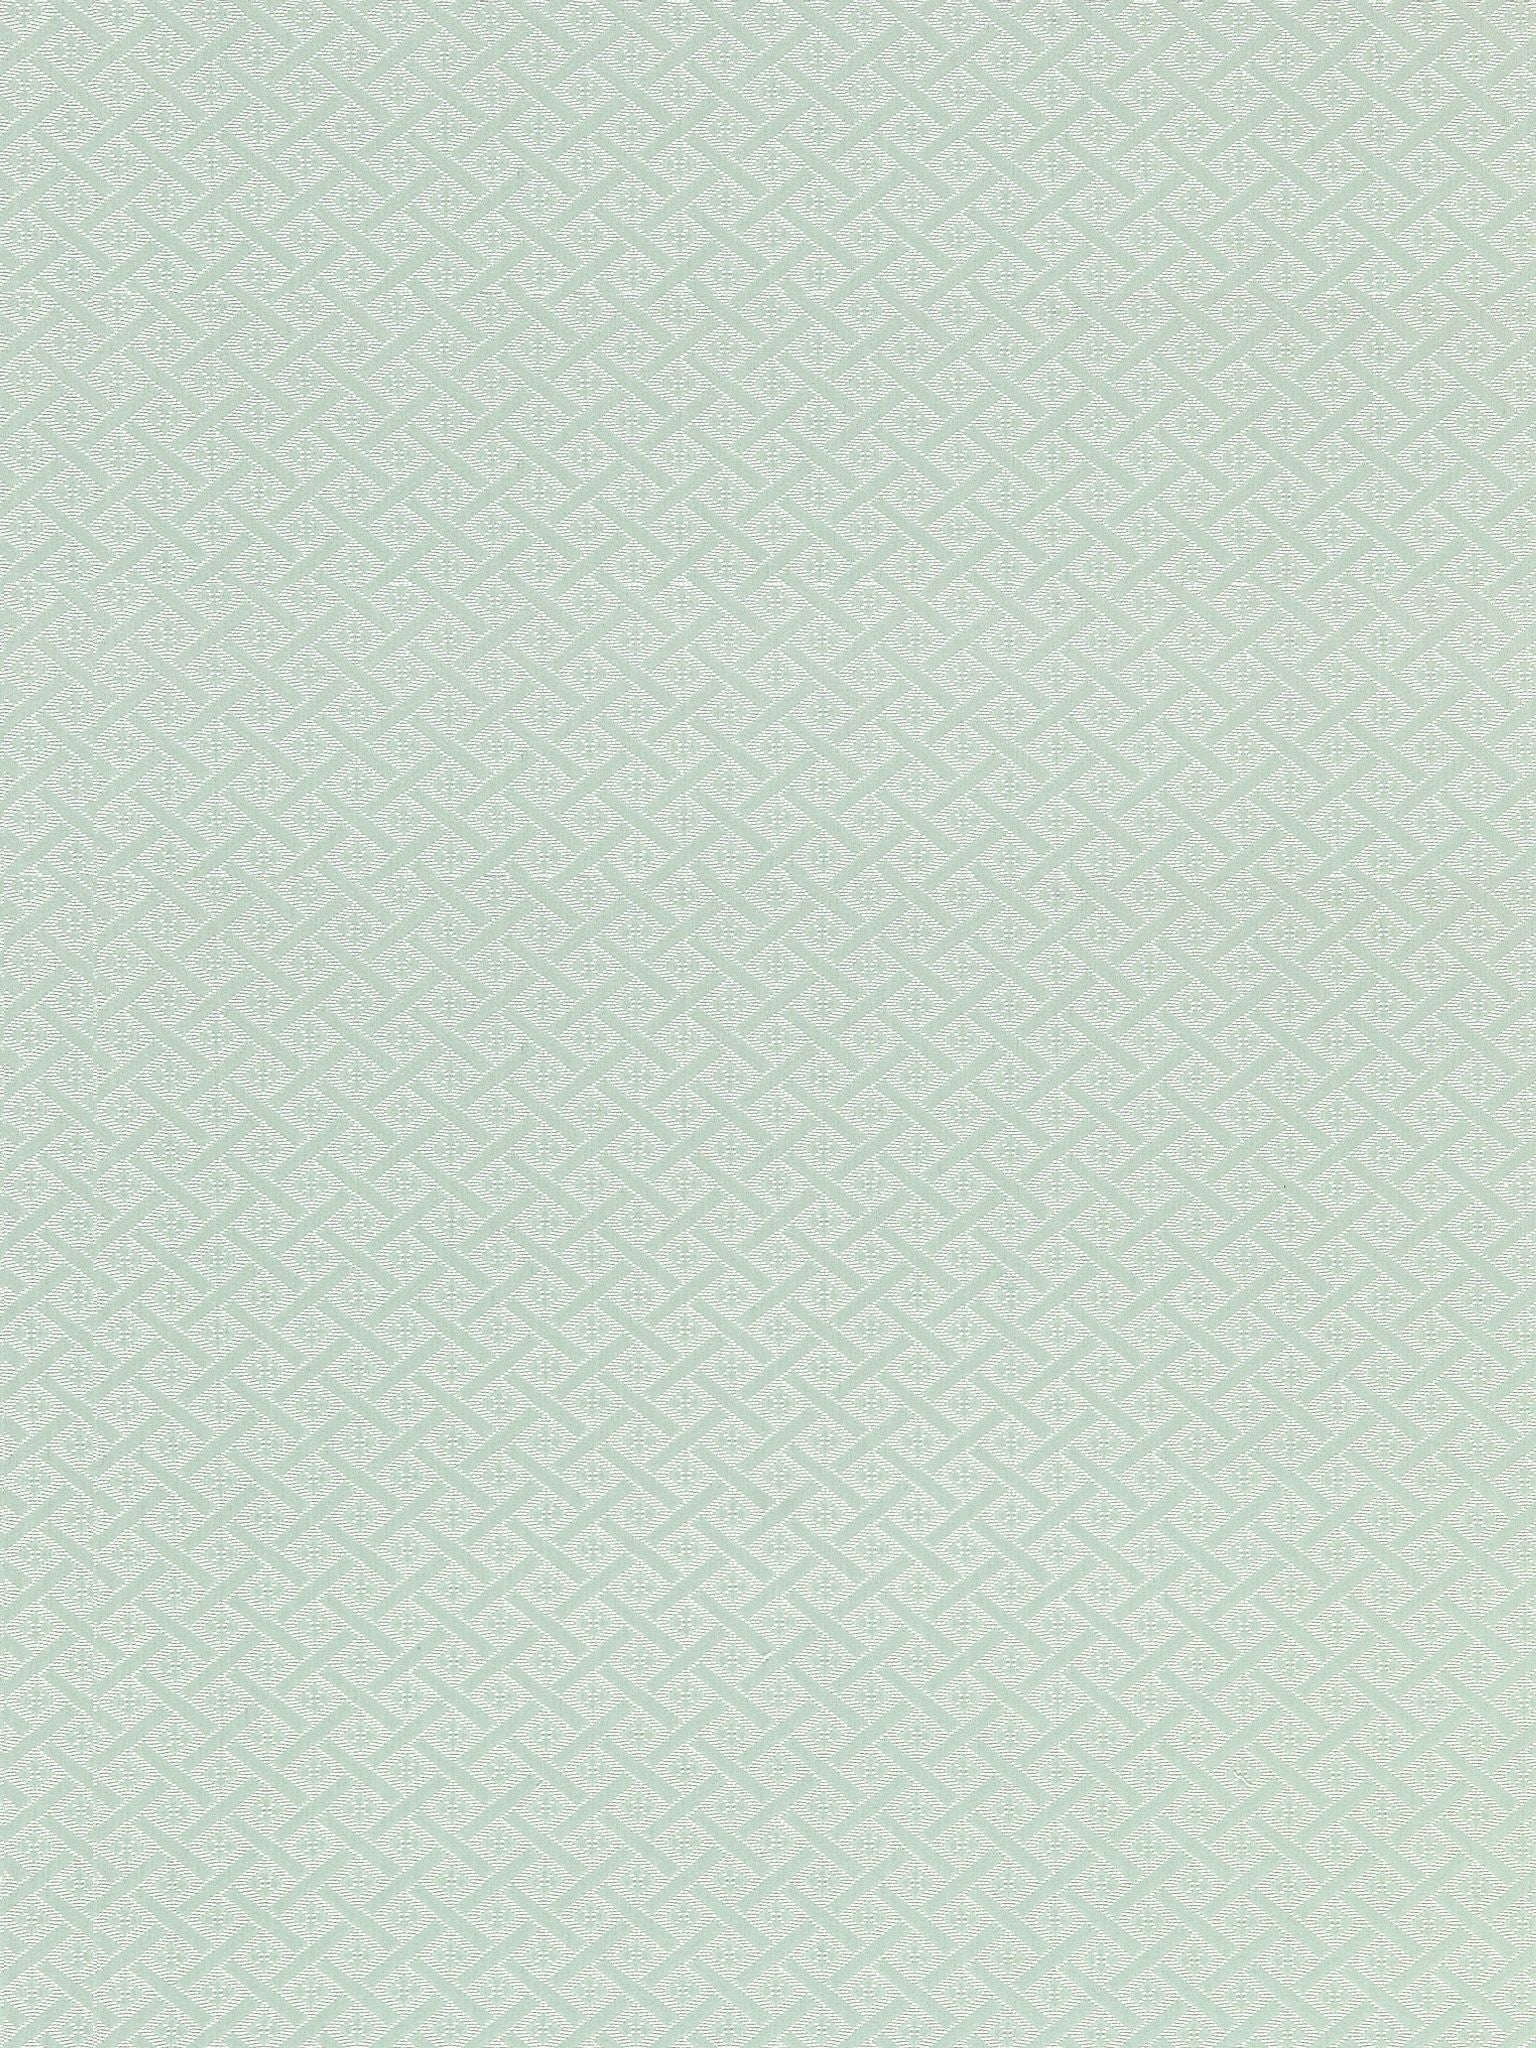 Diamante Matelasse fabric in seaglass color - pattern number SC 000227223 - by Scalamandre in the Scalamandre Fabrics Book 1 collection